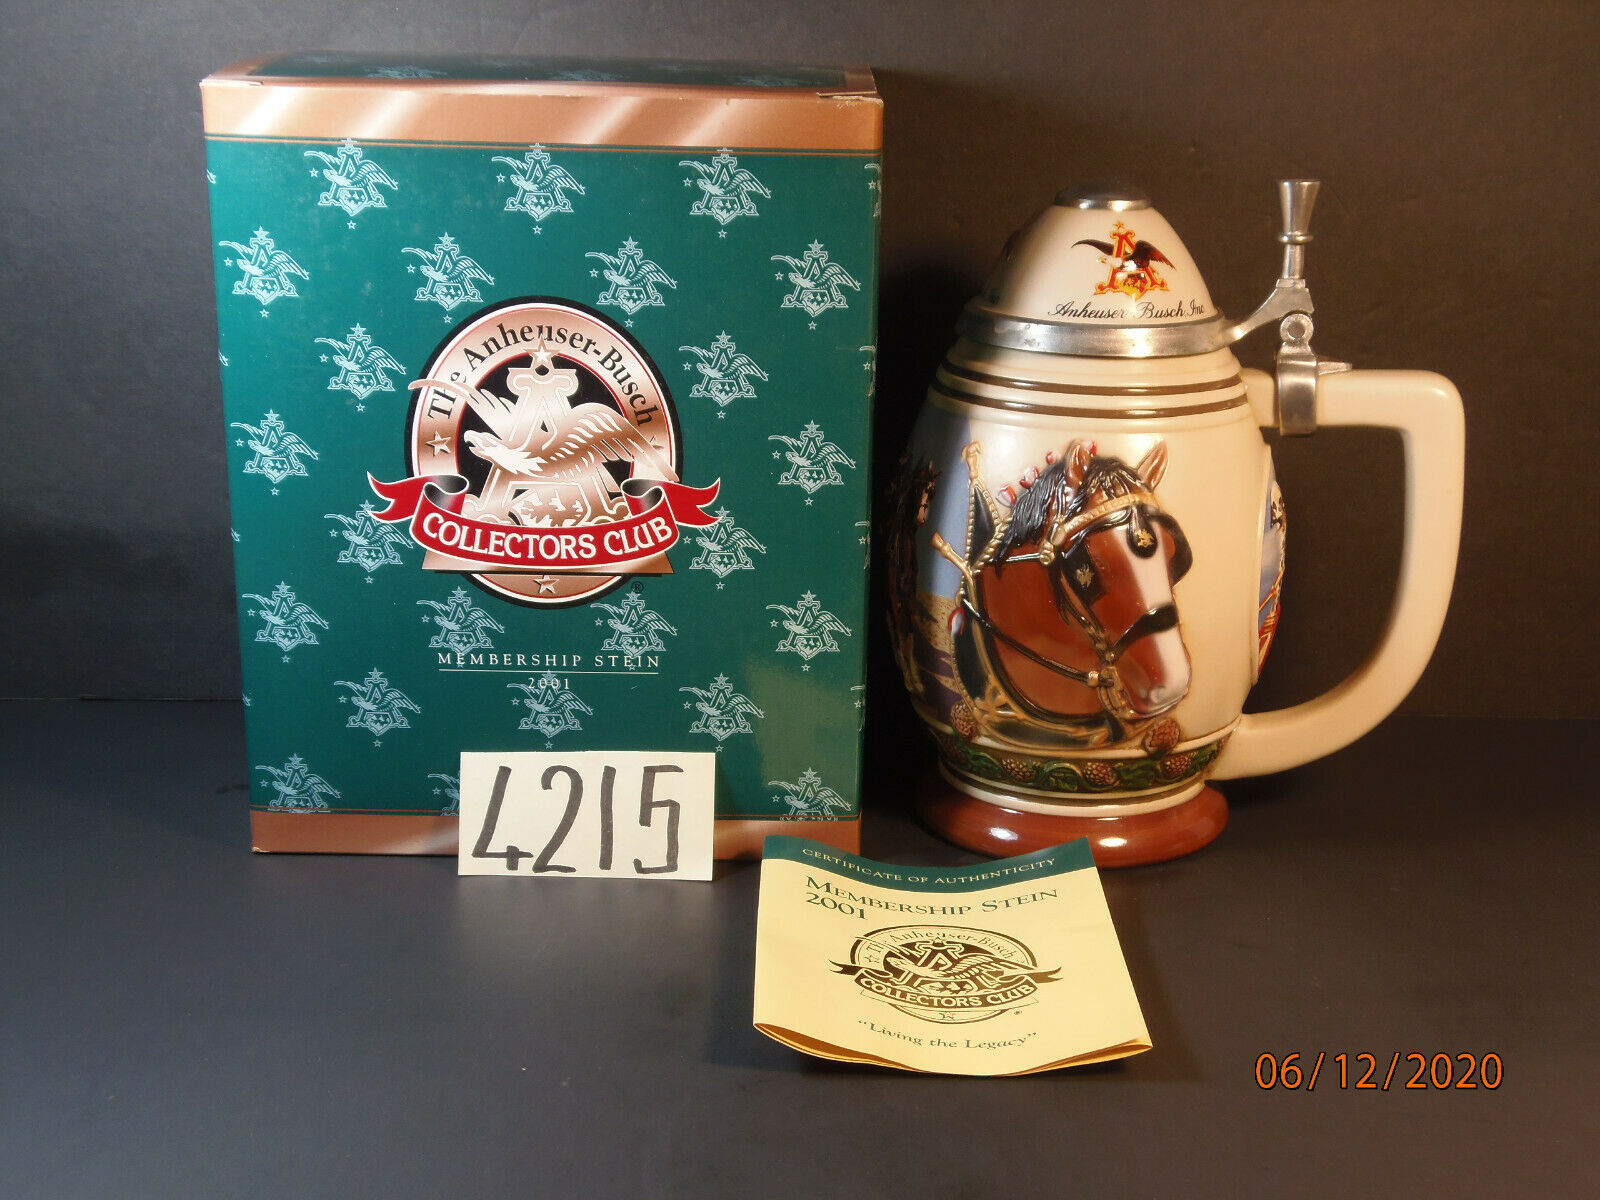 2001 Anheuser Busch Collectors Club Membership Stein Living The Legacy Cb17,ob